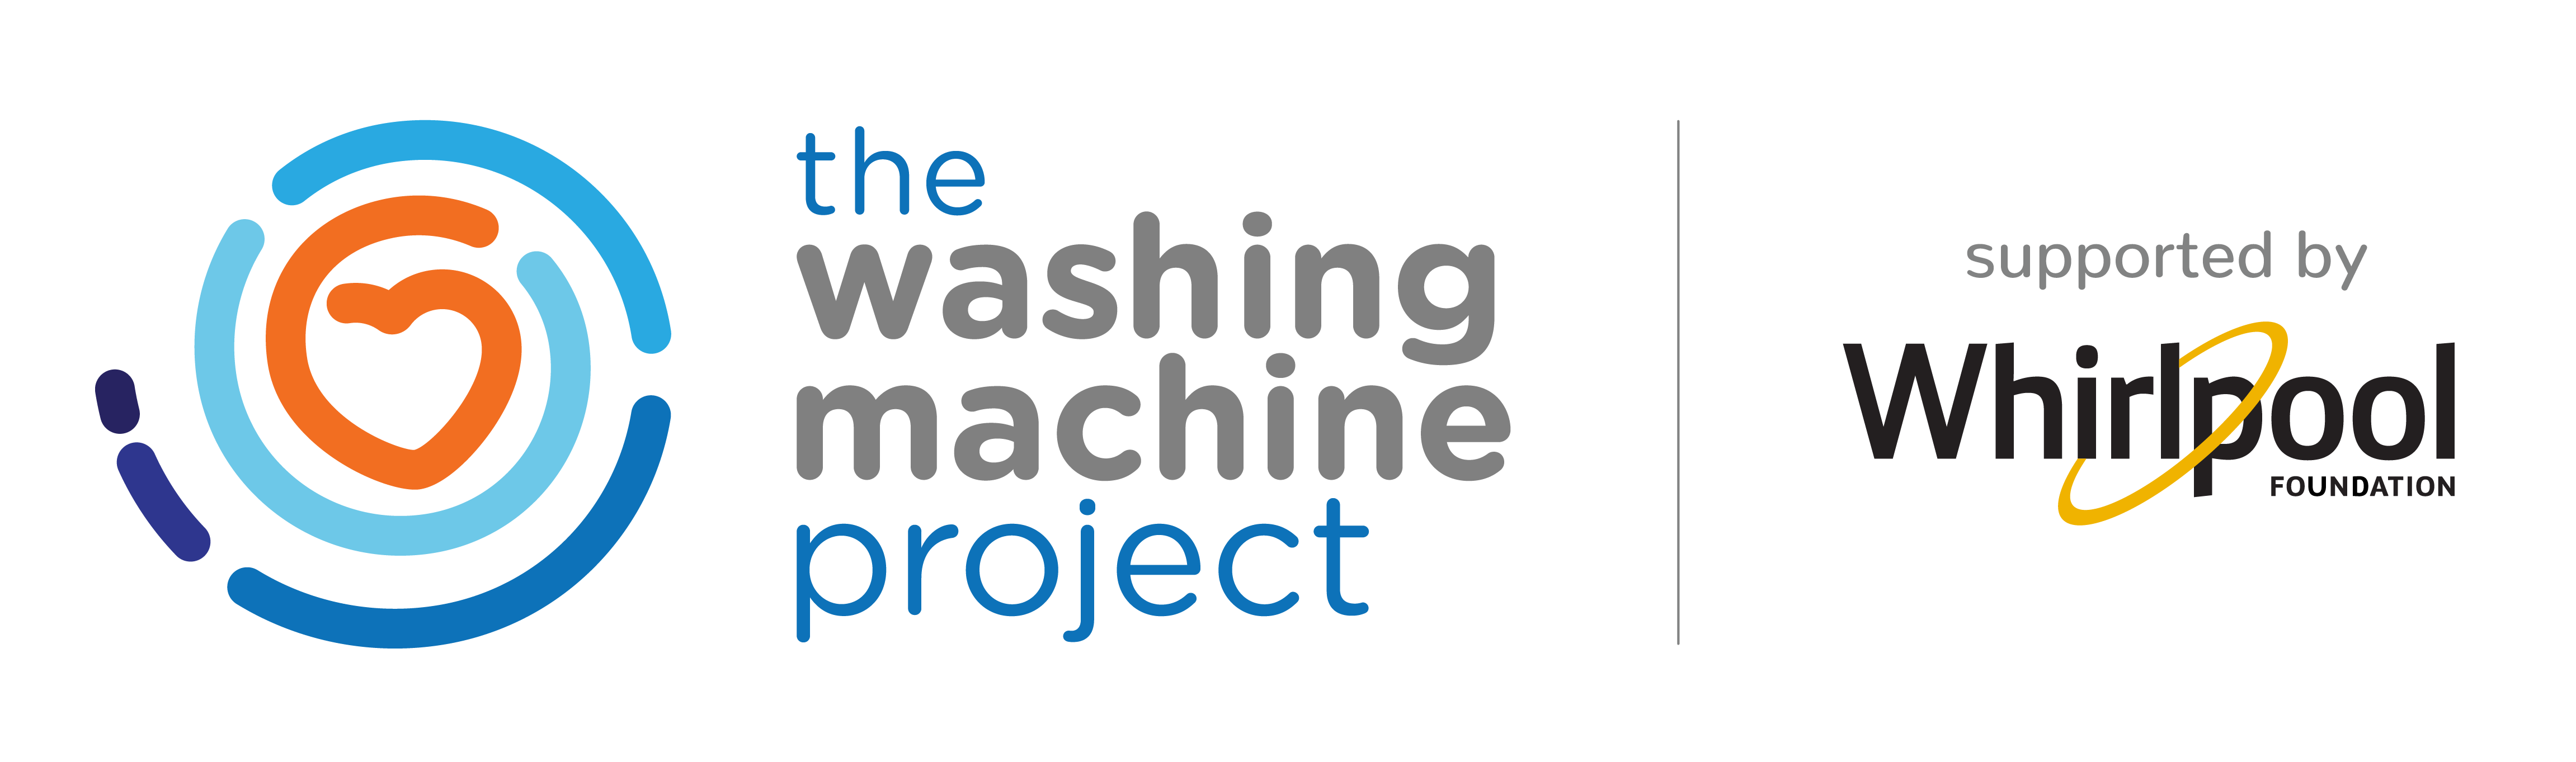 The Washing Machine Project Supported by Whirlpool Foundation logo lockup